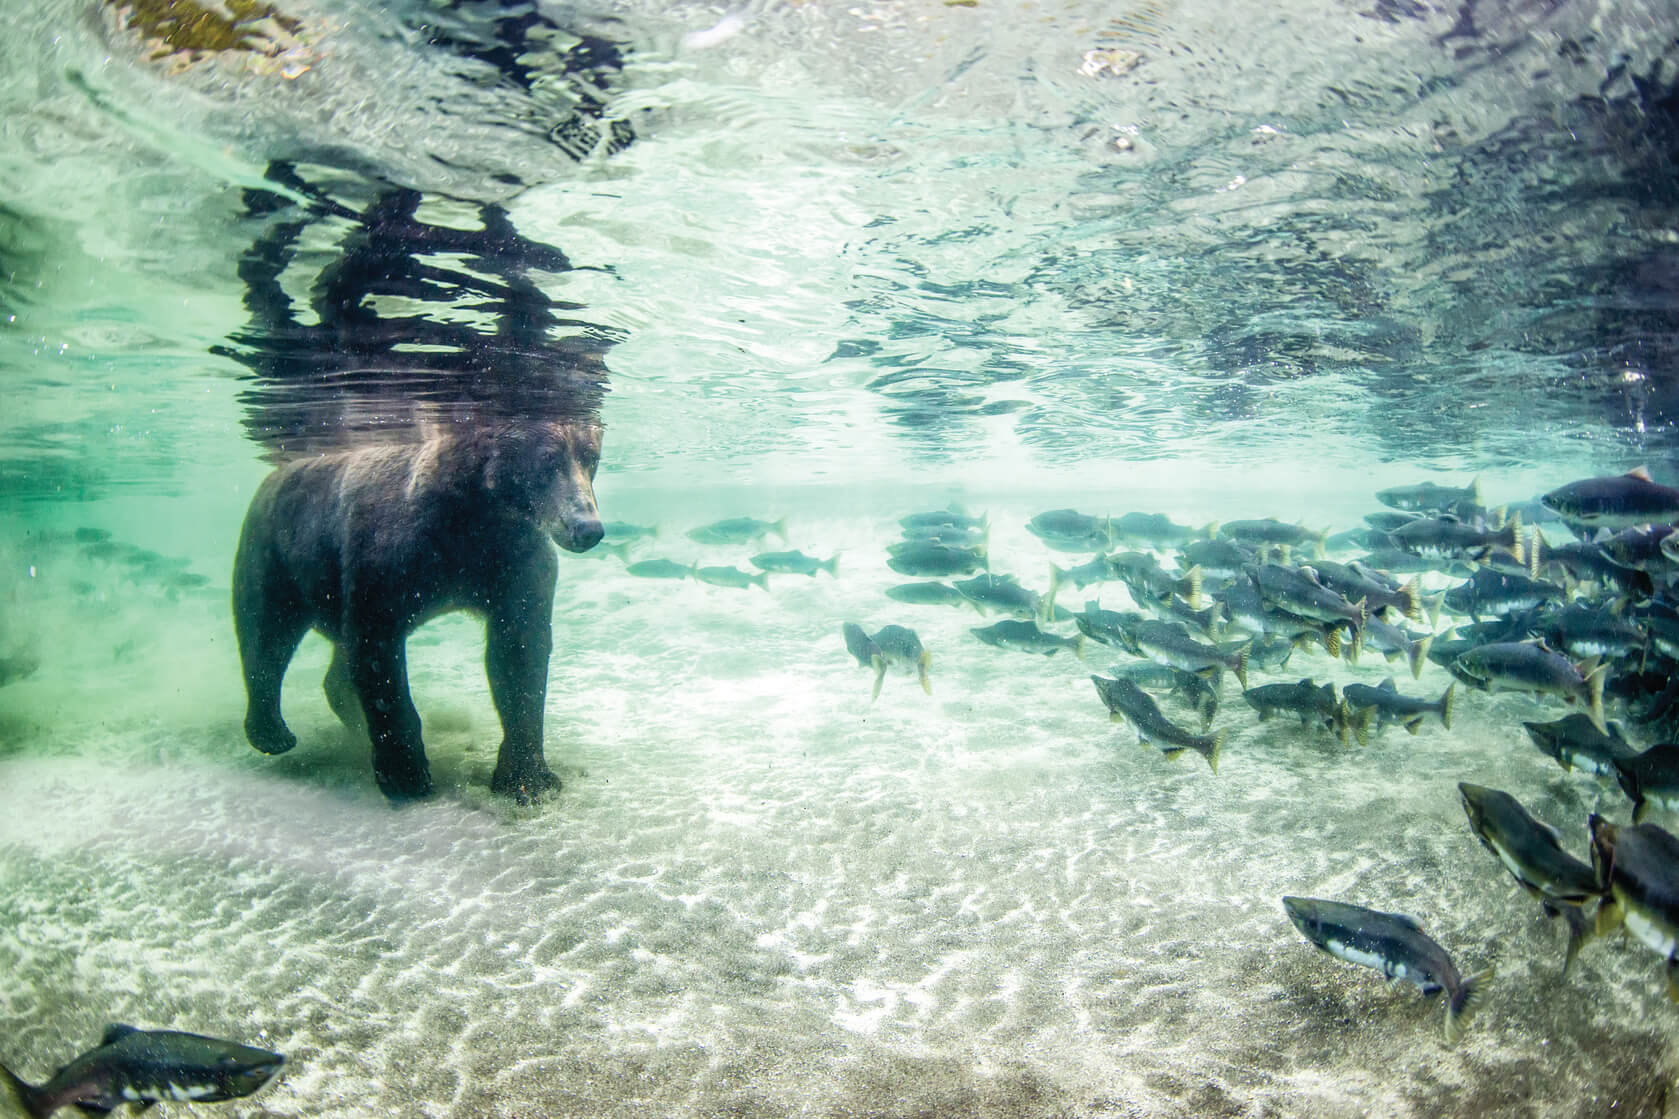 A bear walks under the water toward some fish